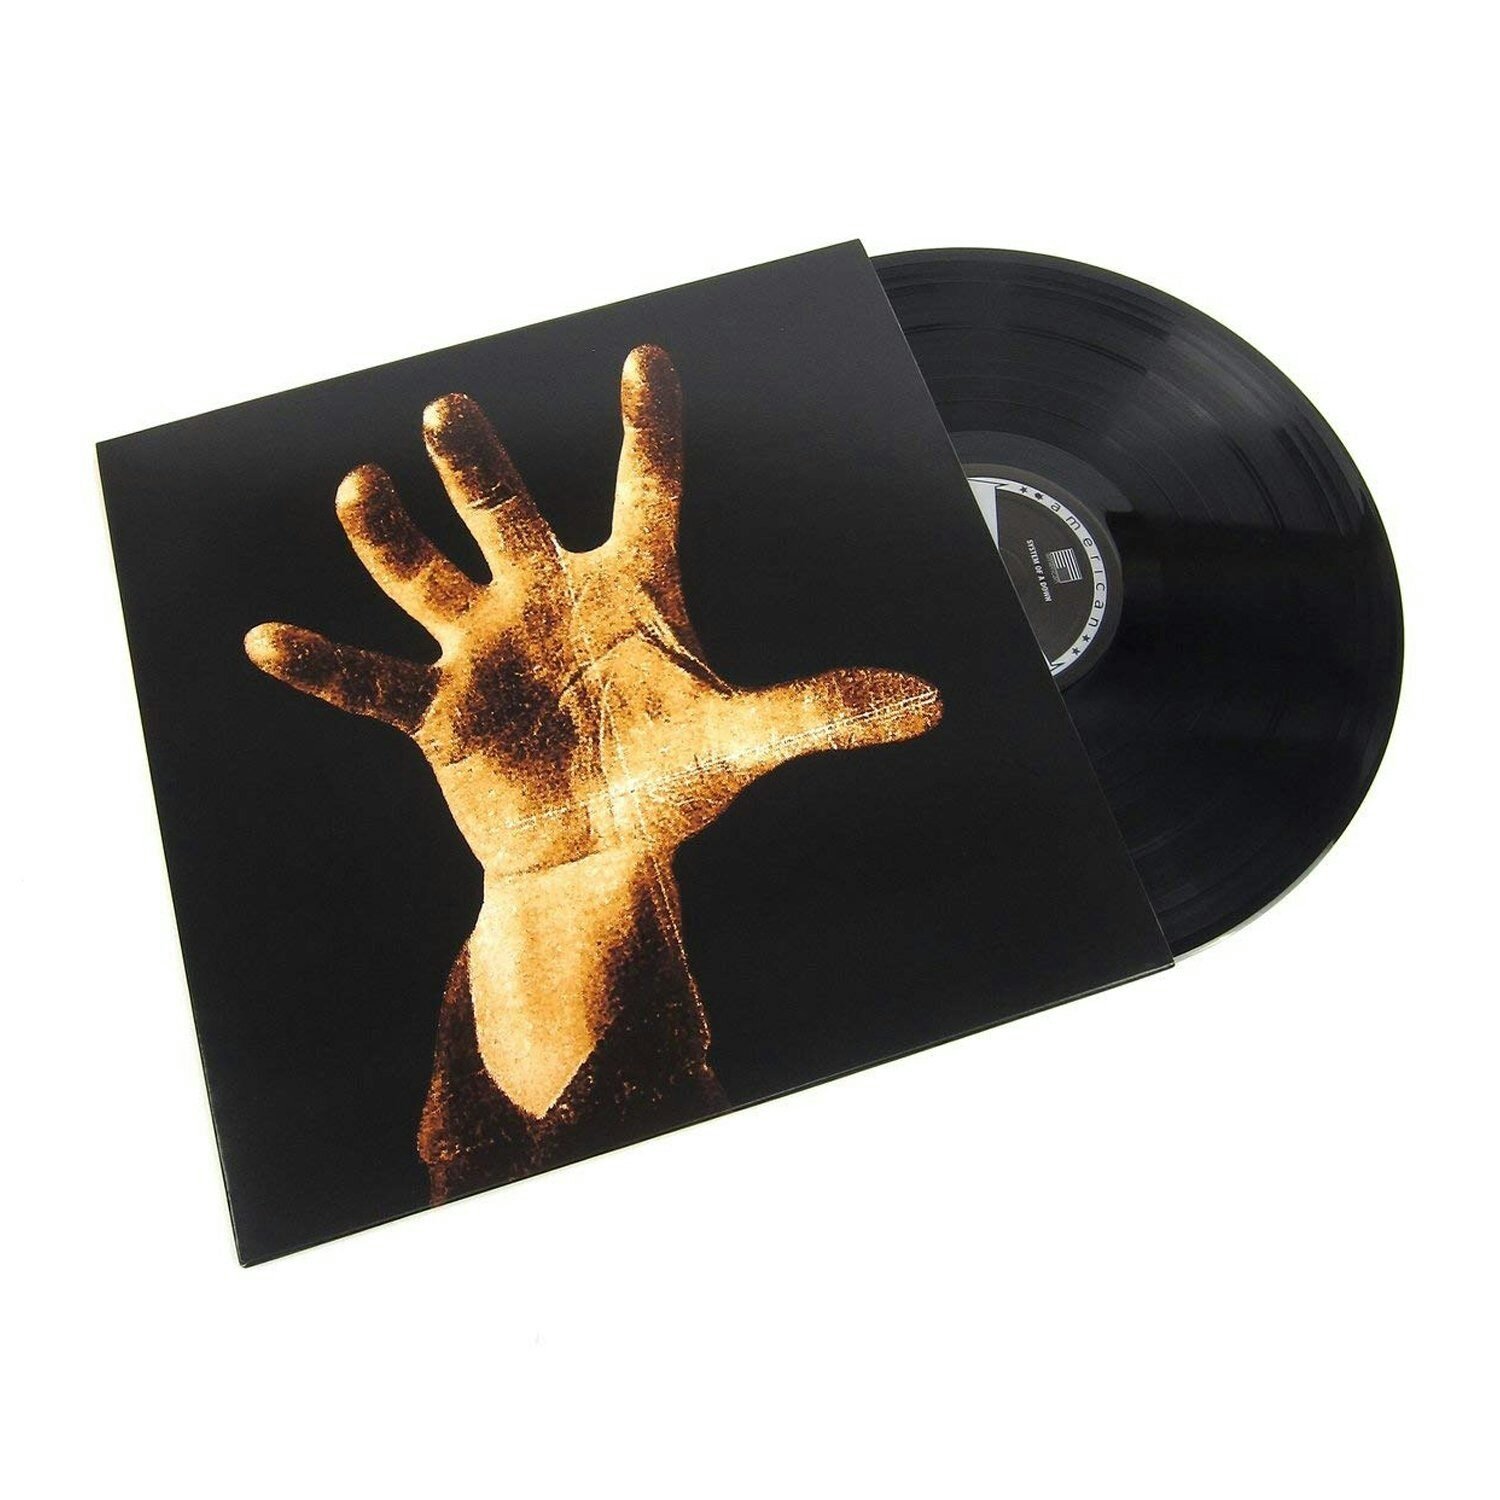 SYSTEM OF A DOWN SYSTEM OF A DOWN Limited Black Vinyl 12" винил